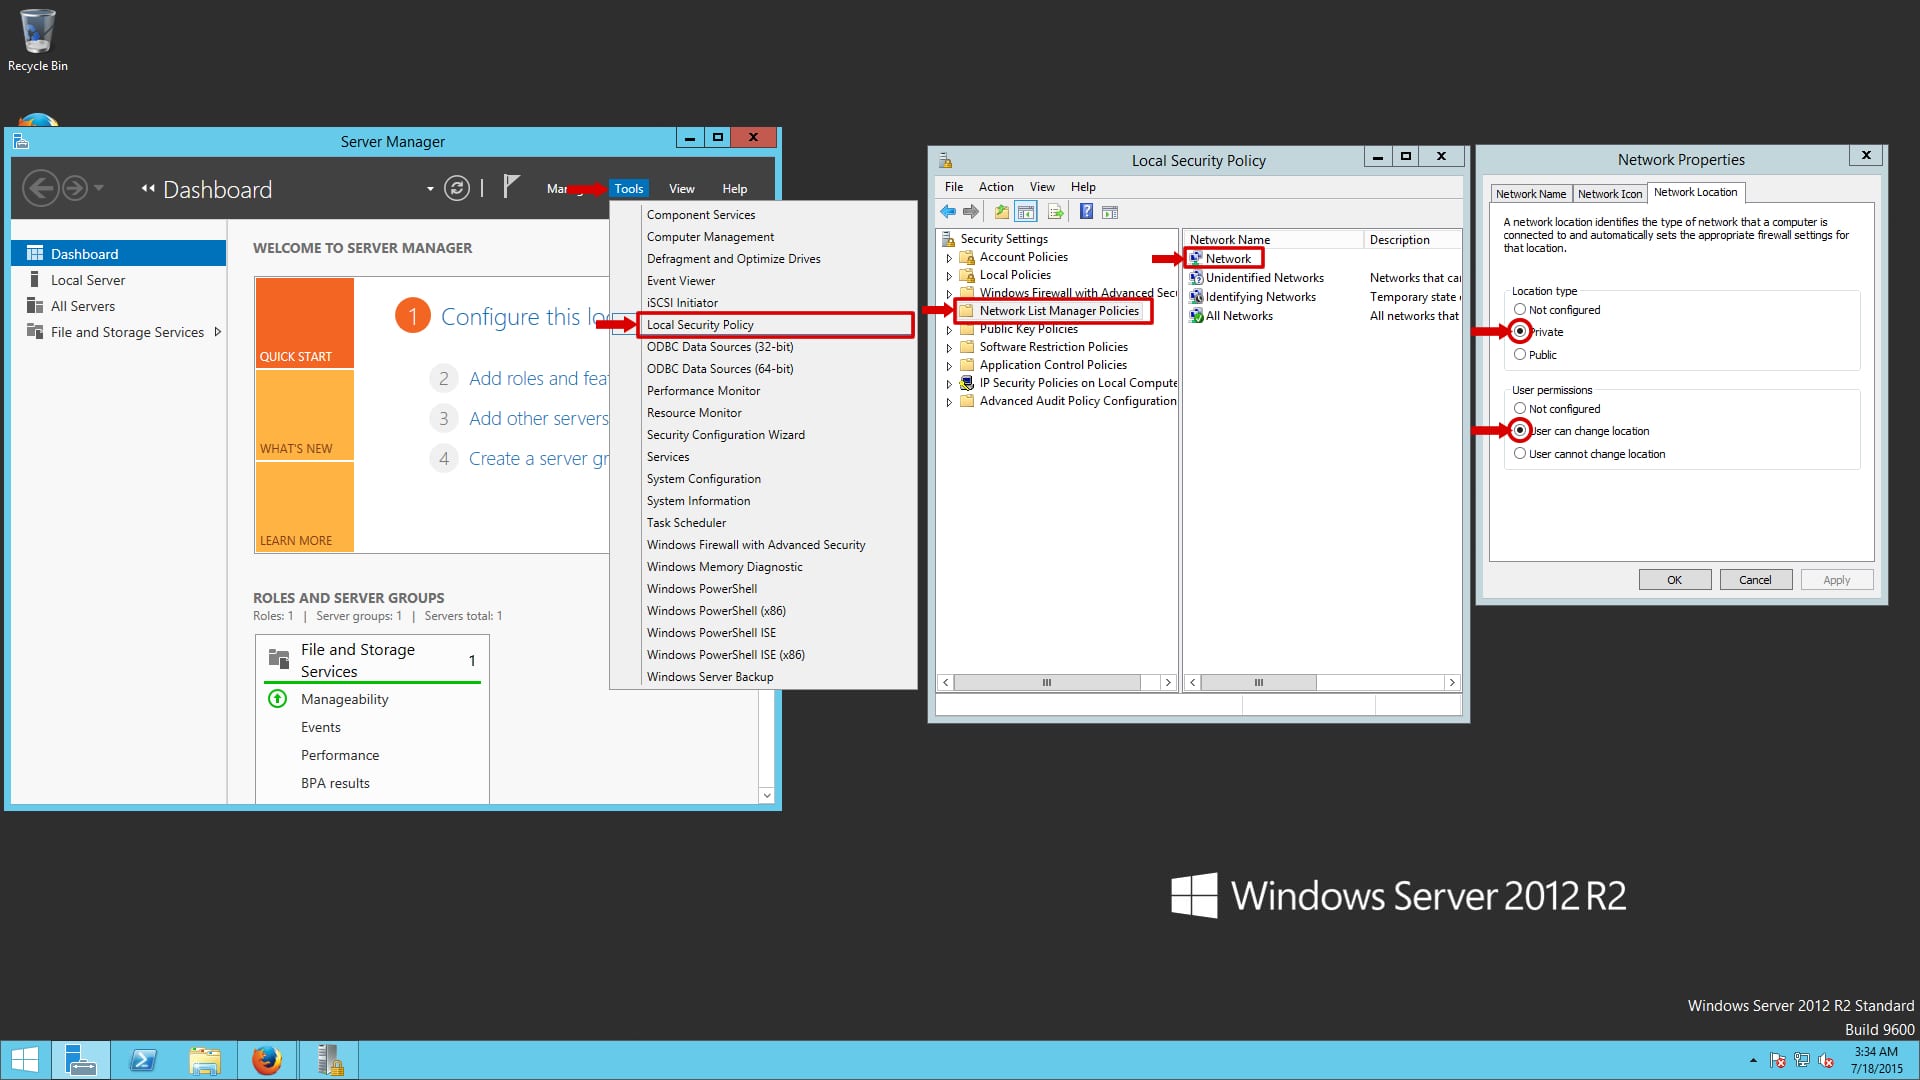 How To Change Network Location On Windows Server 2012 R2